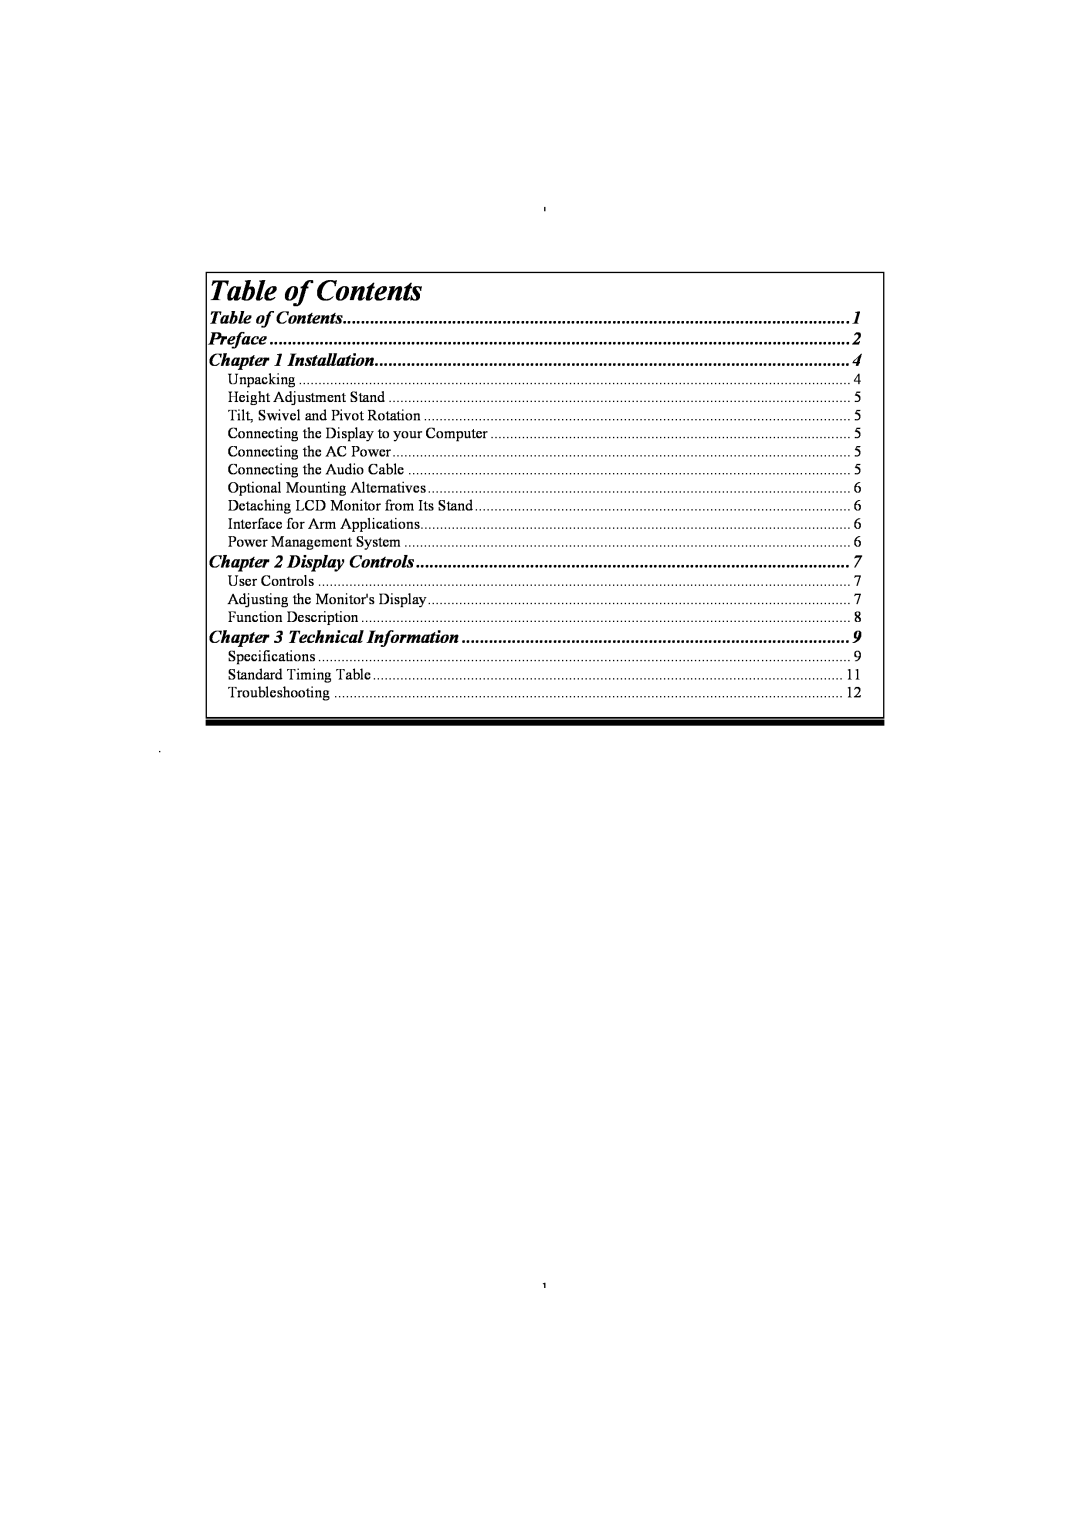 Planar PL2011 manual Table of Contents, Preface, Installation, Display Controls, Technical Information 